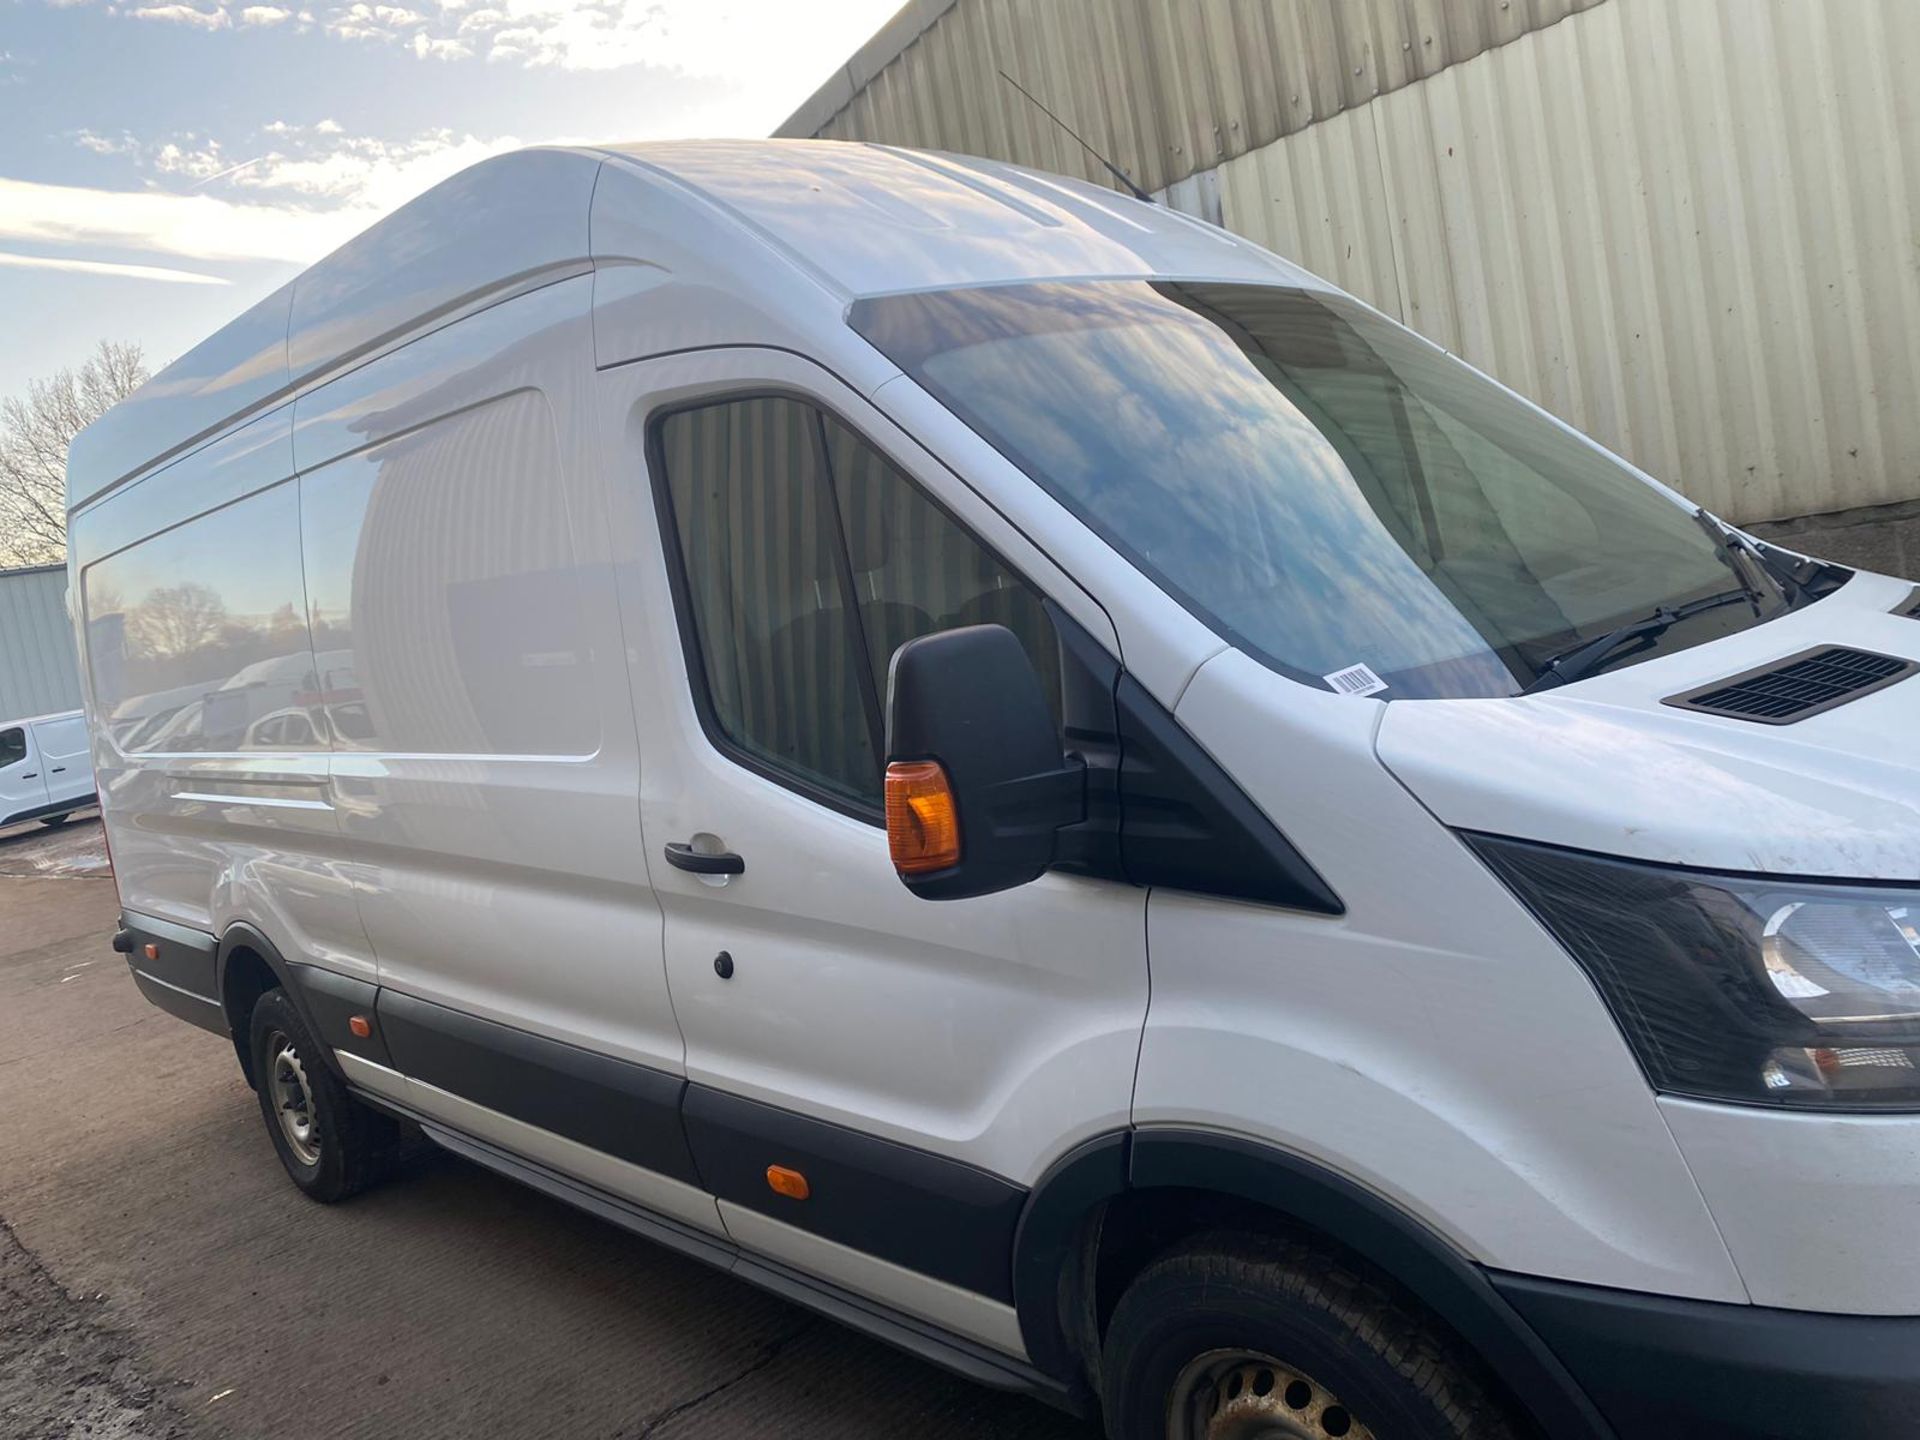 2018/18 REG FORD TRANSIT 350 JUMBO L4H3 BIGGEST AVAILABLE, SHOWING 0 FORMER KEEPERS *PLUS VAT*